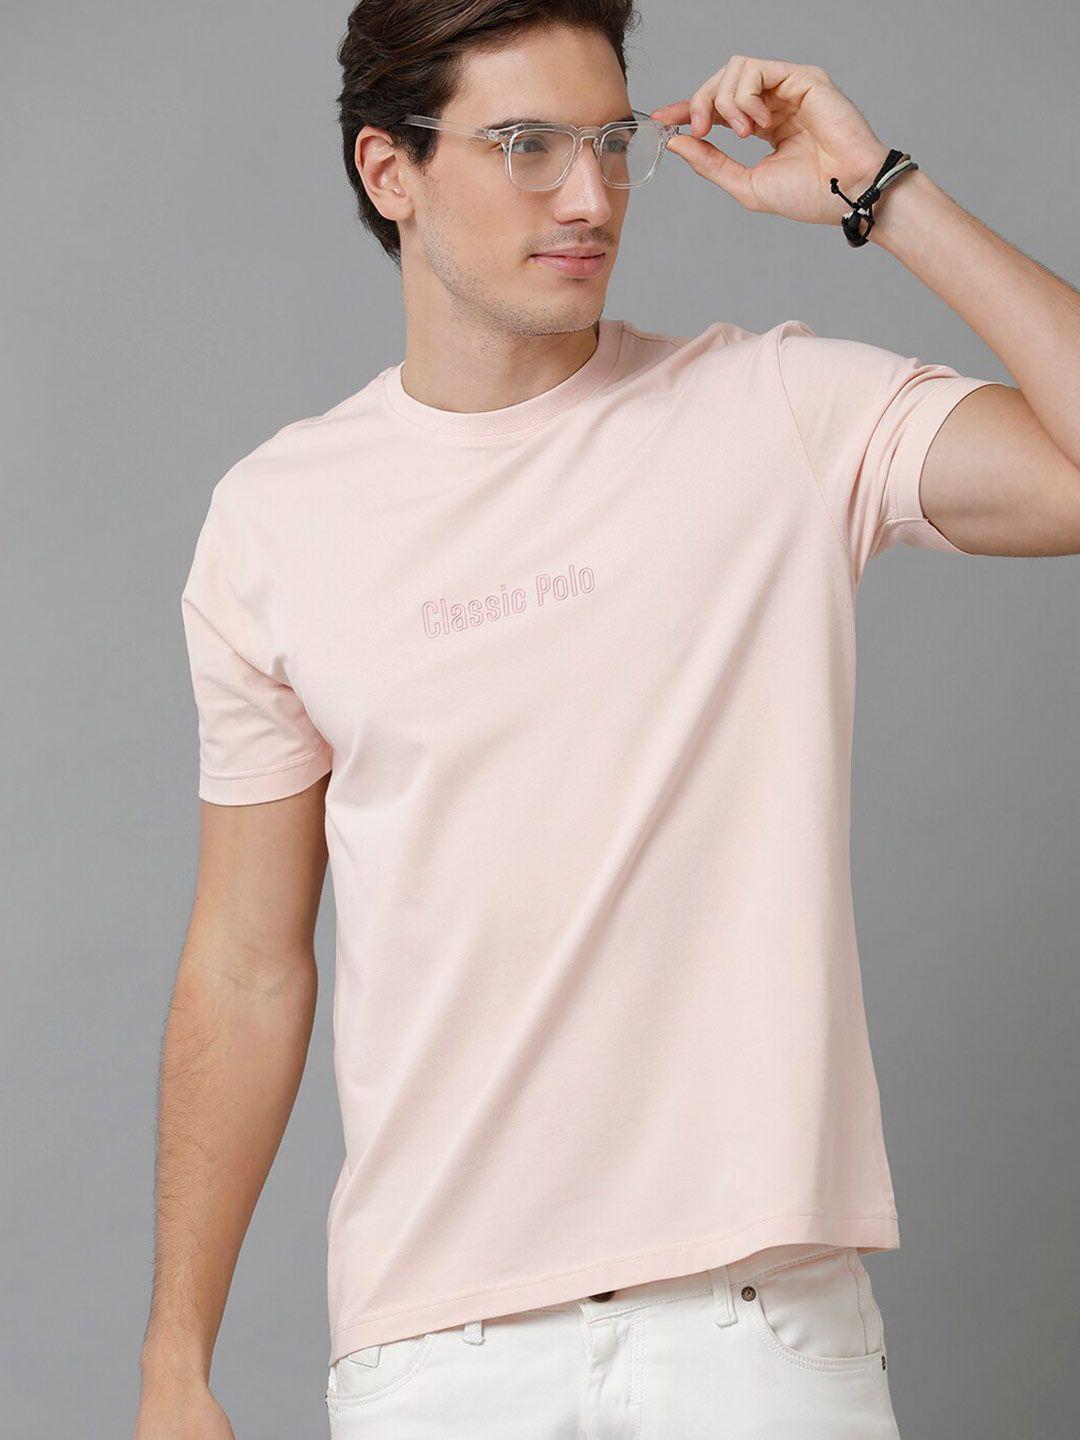 classic polo typography printed slim fit cotton t-shirt